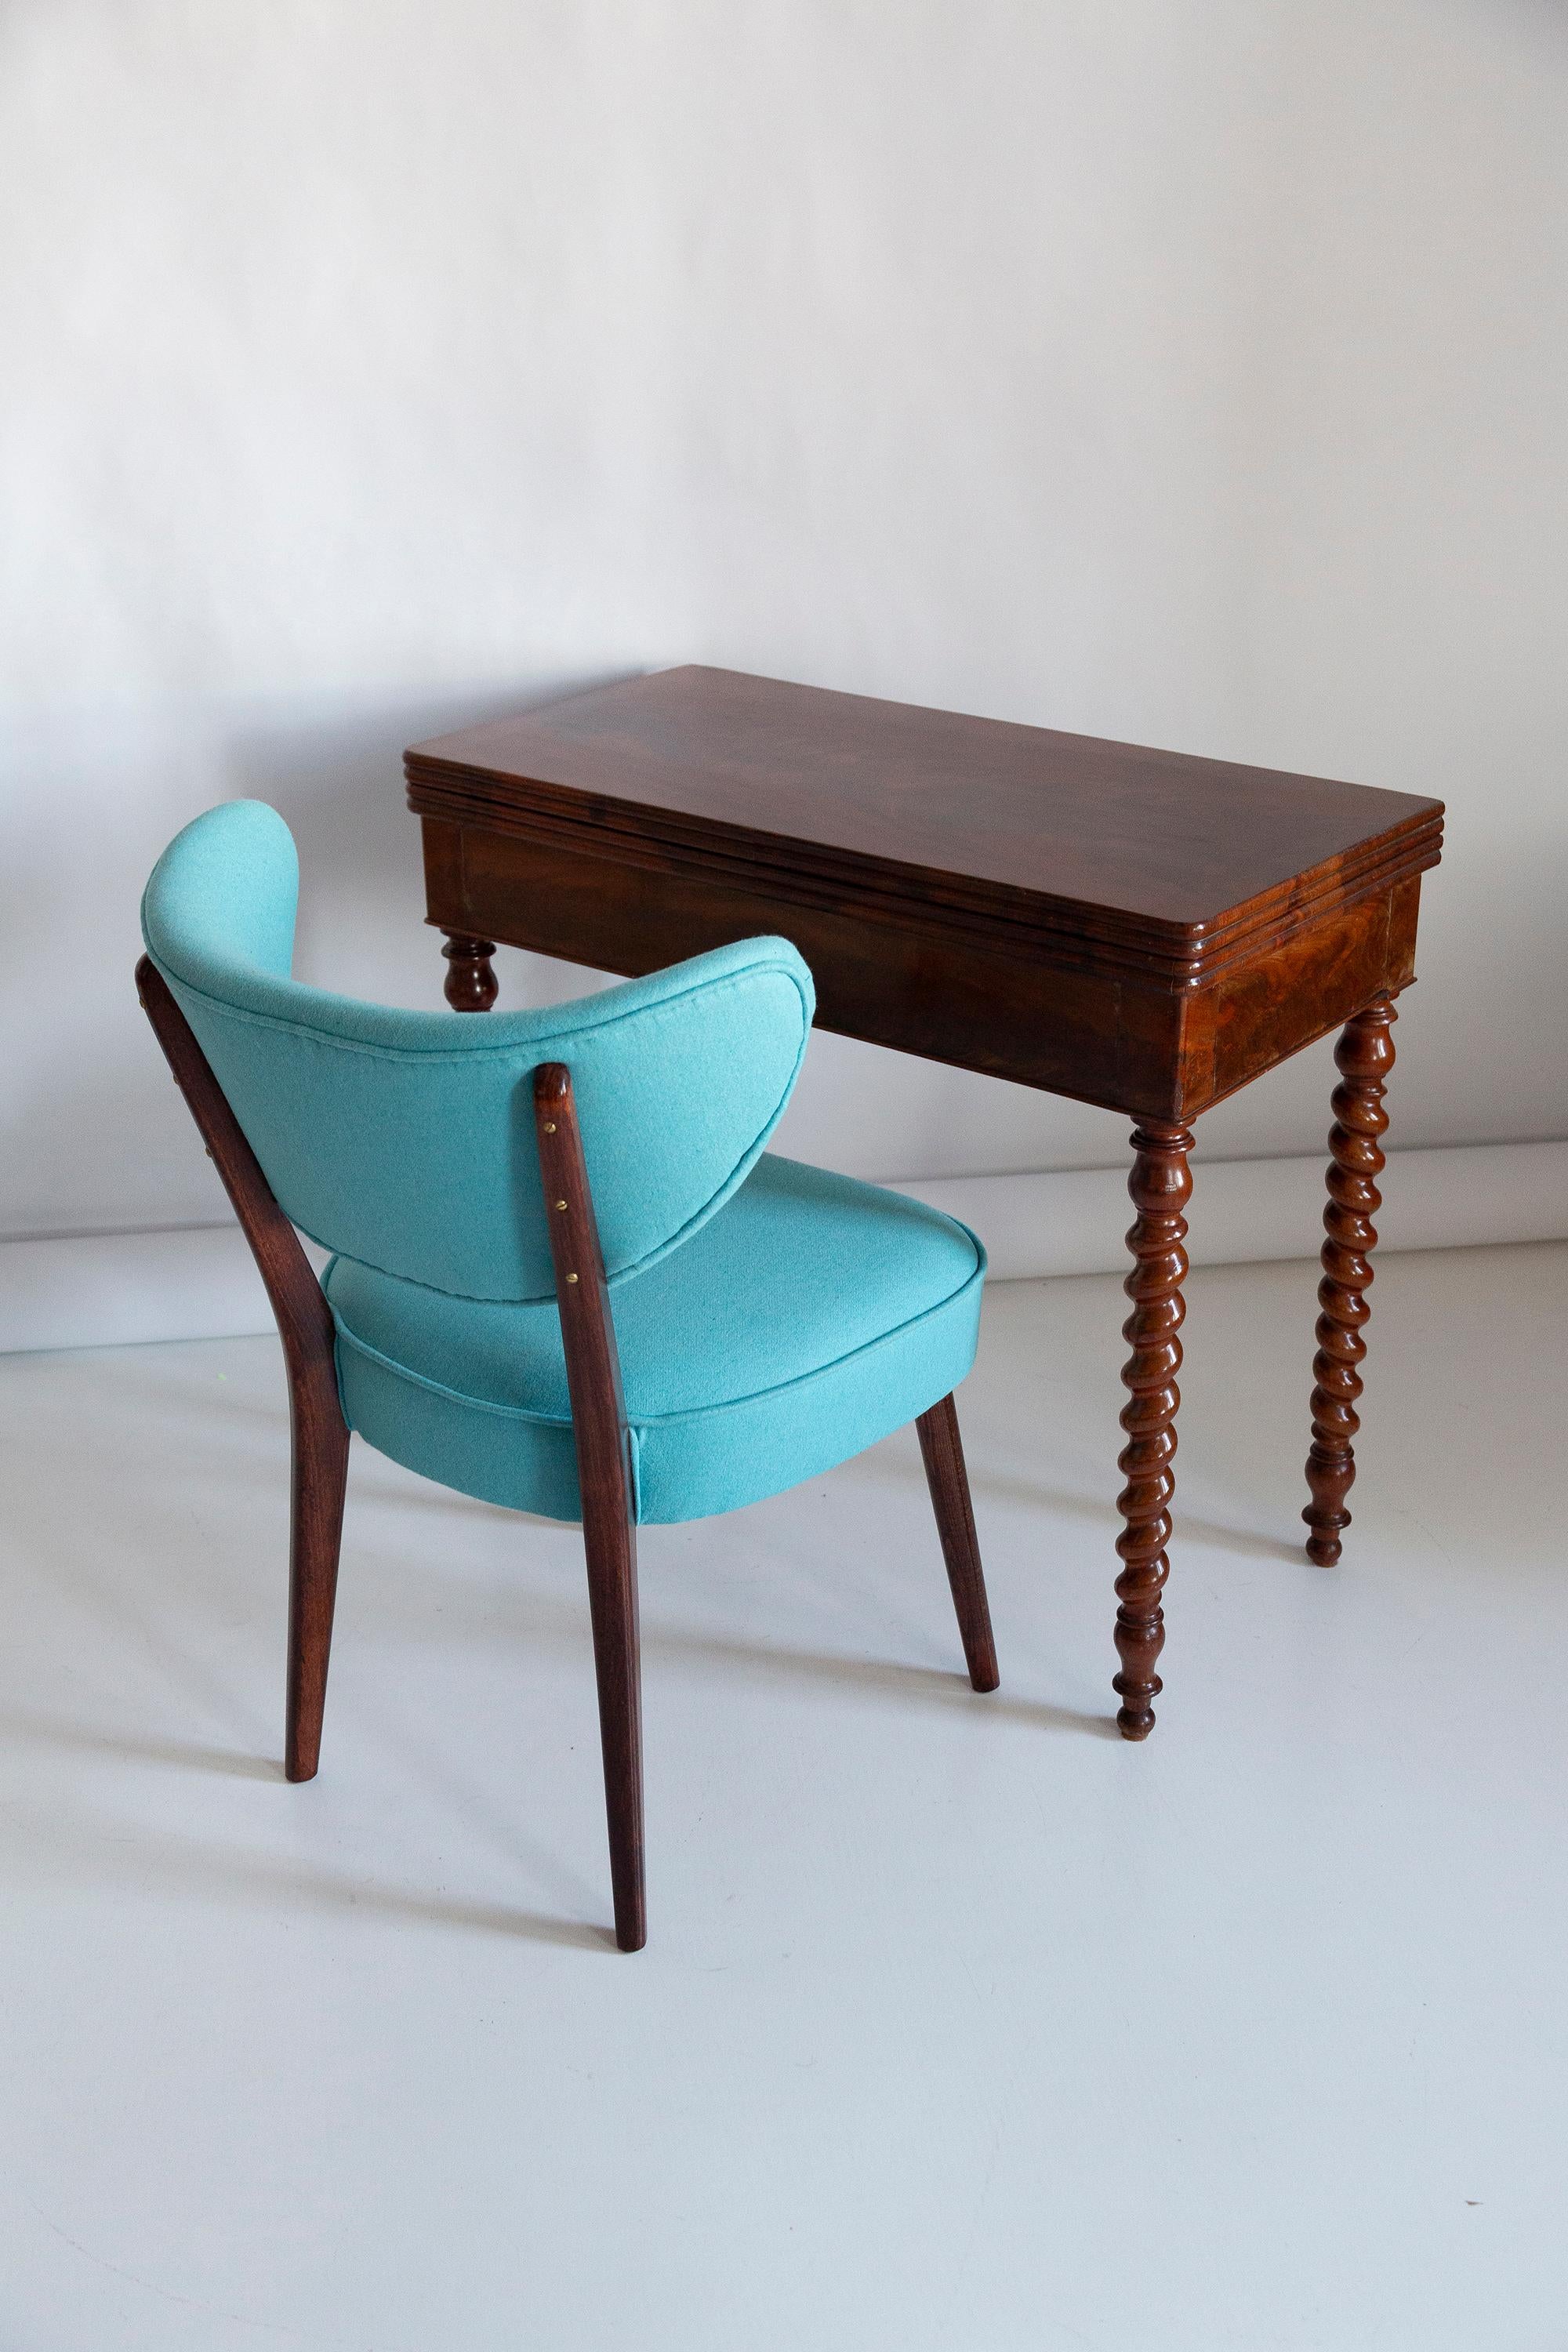 Mid-Century Modern Set of Ten Shell Dining Chairs, Turquoise Wool, by Vintola Studio, Europe. For Sale